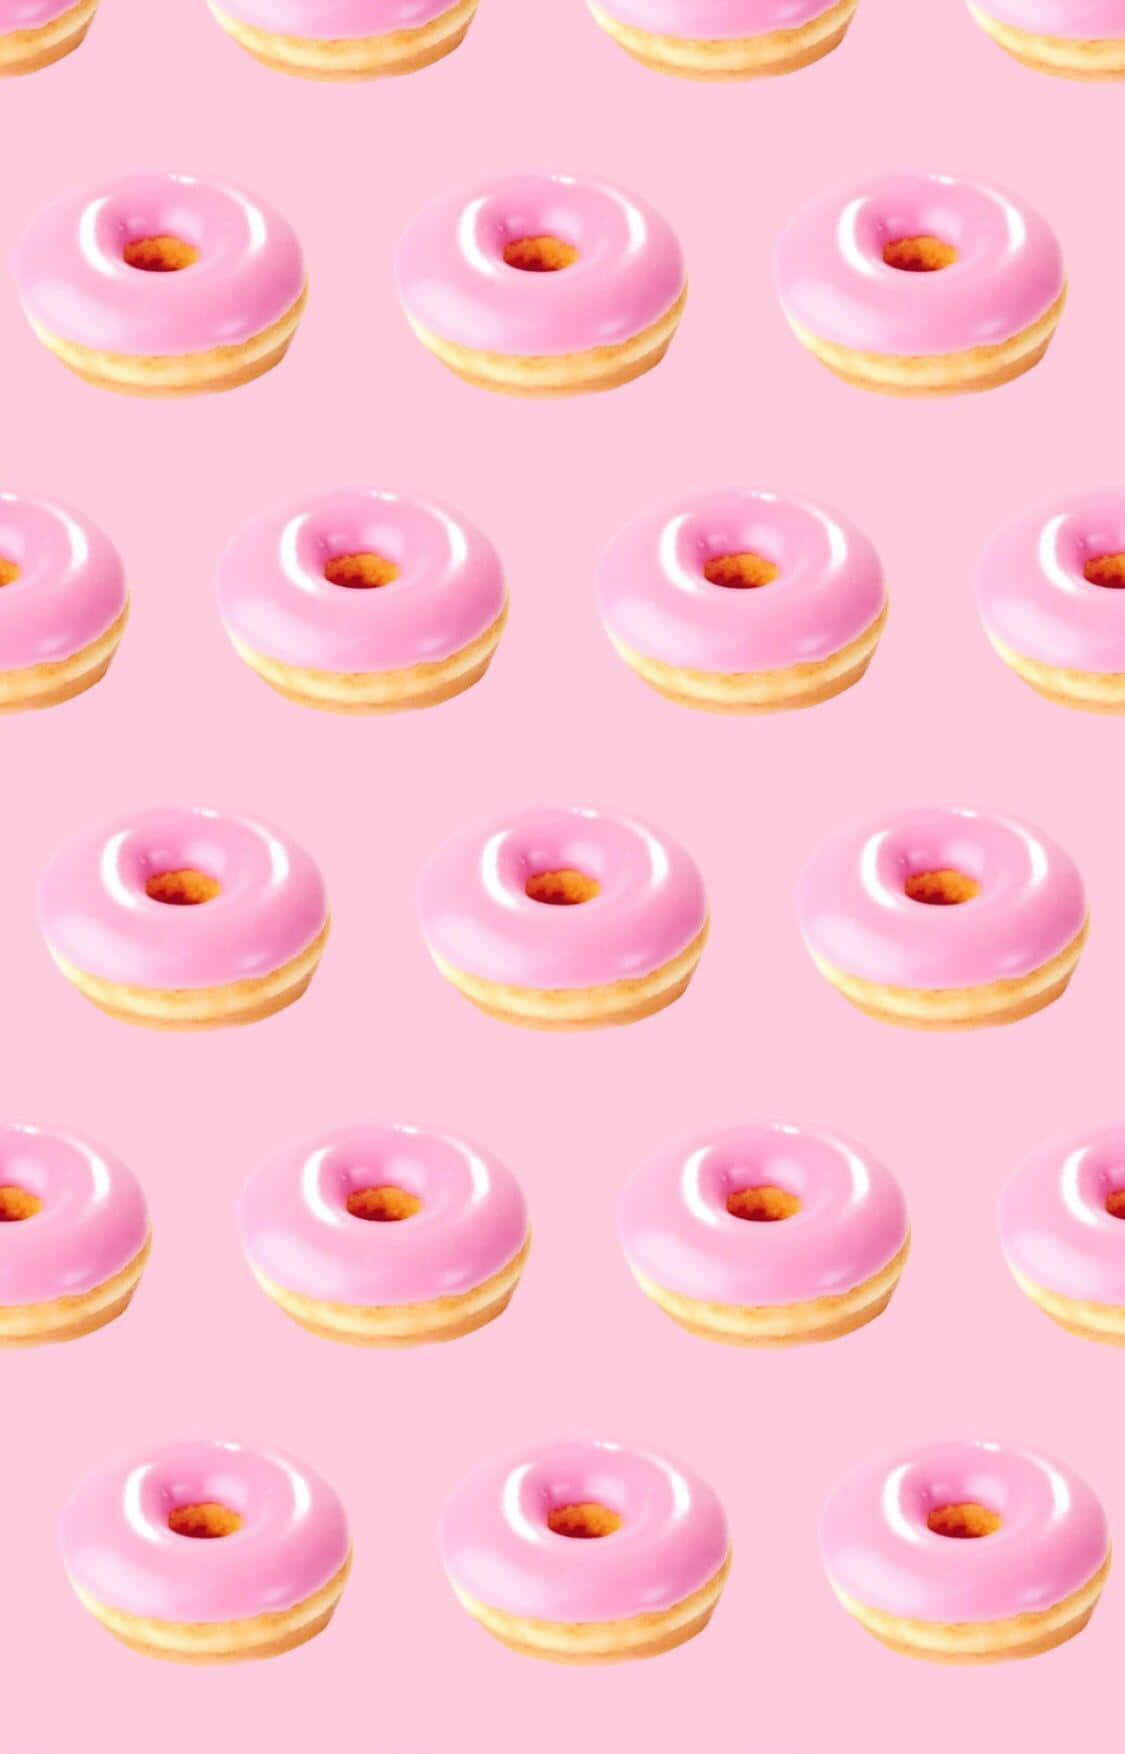 Adorable Donut With Sprinkles and Pink Icing Wallpaper